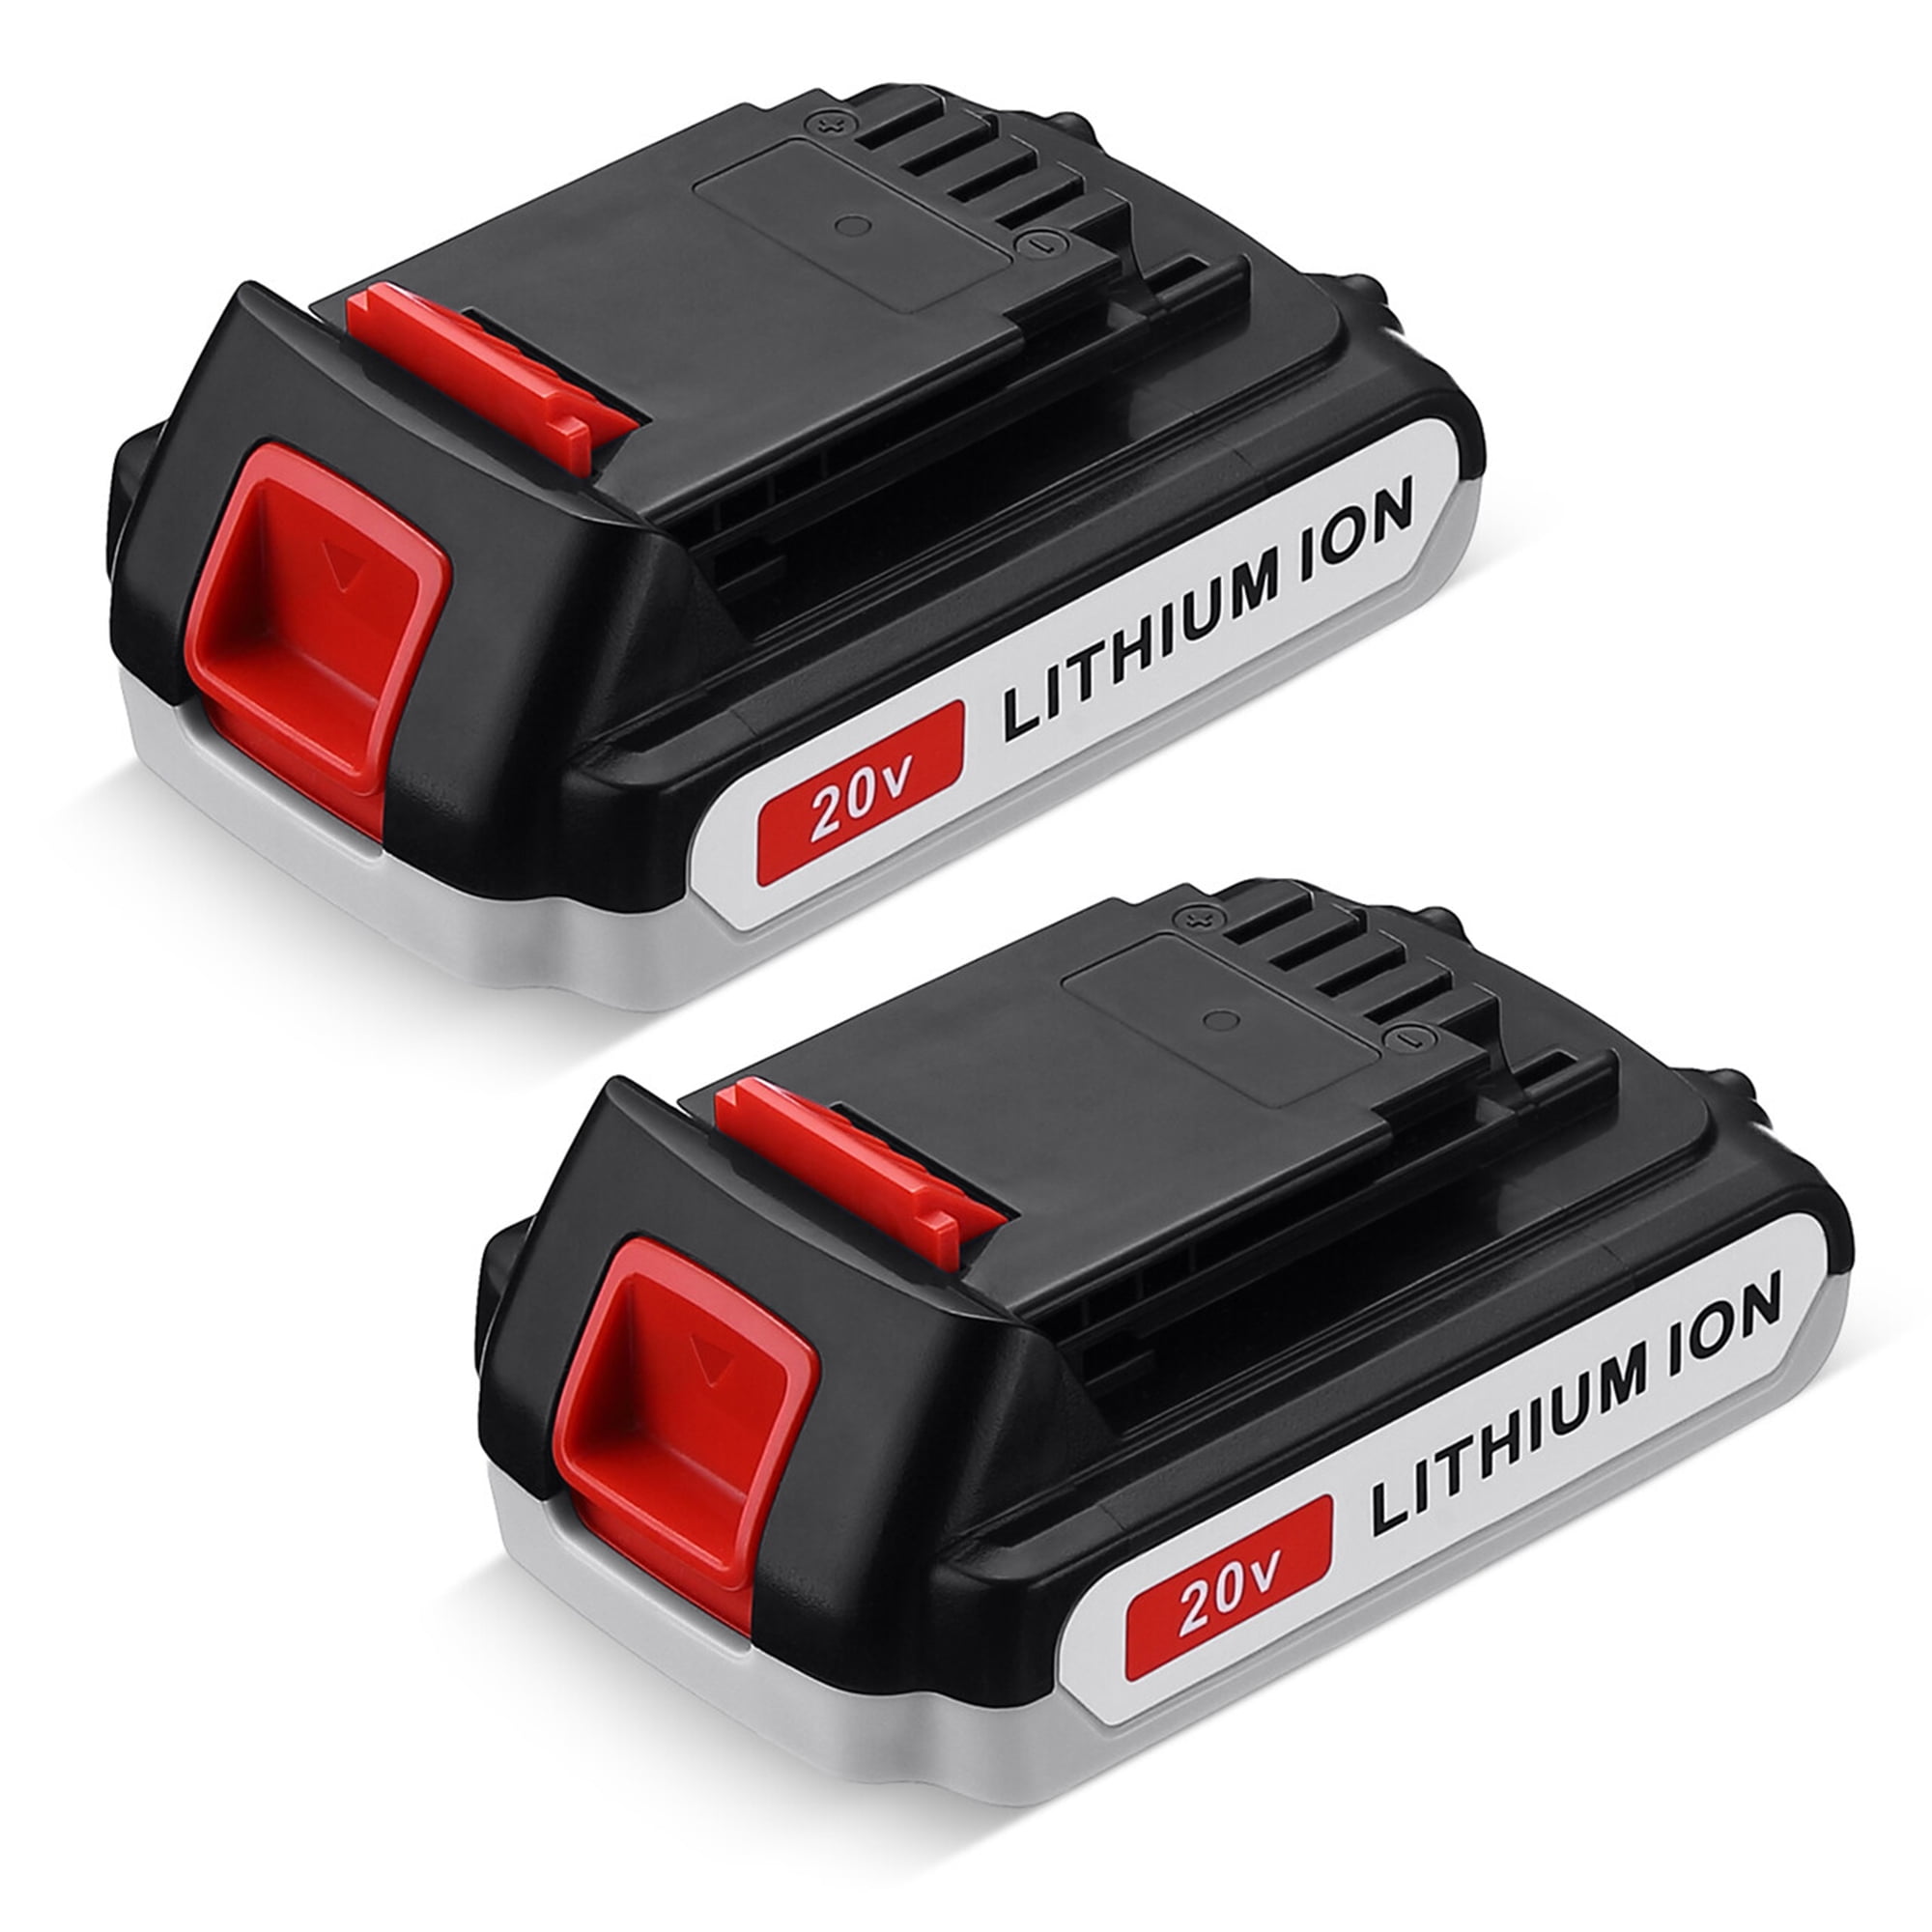 LBX20 Cordless Tool Battery 2 Pack 20v 2500mAh Lithium-Ion Replacement Battery for Black&Decker LBXR20 LB20 Upgraded Energup 